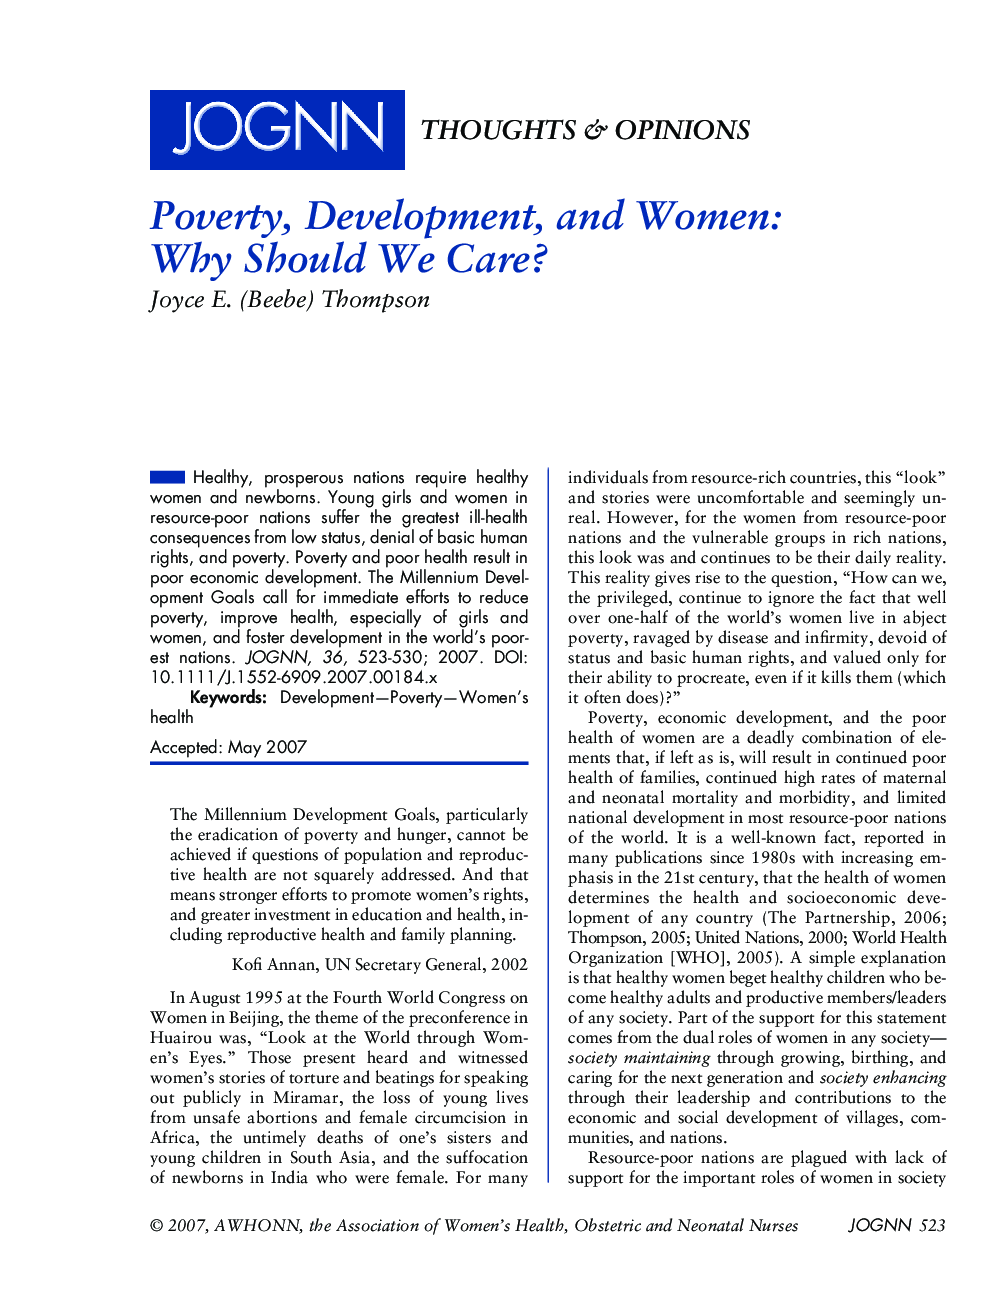 Poverty, Development, and Women: Why Should We Care?